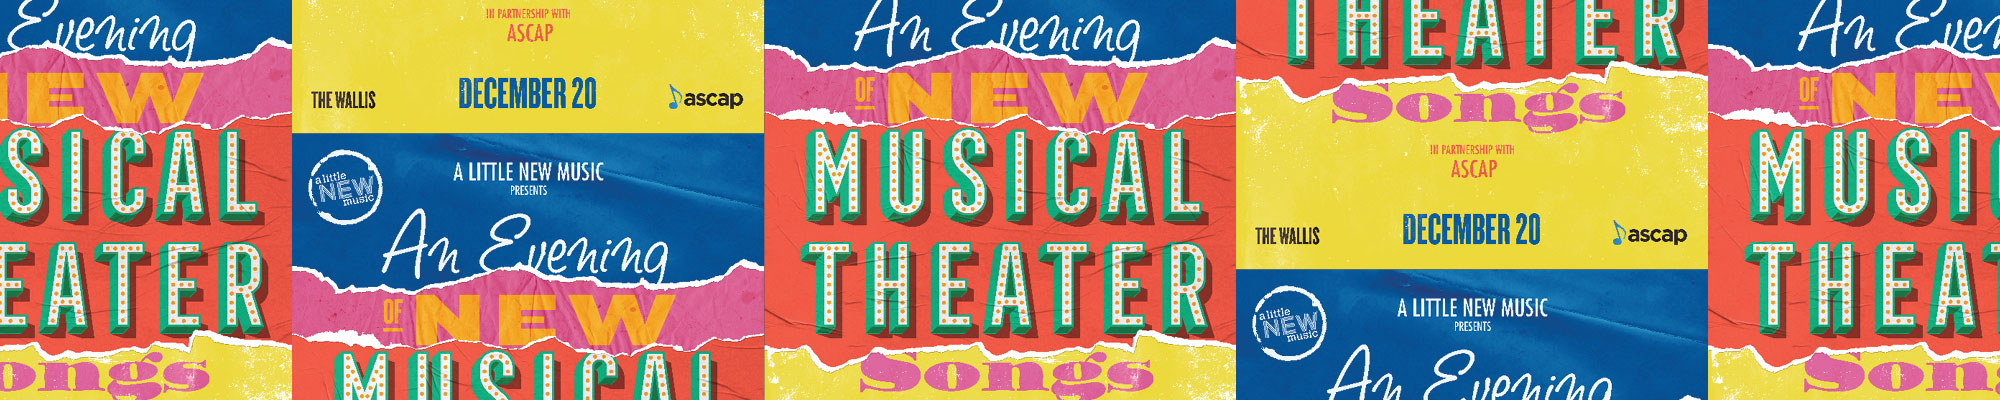 AN EVENING OF NEW MUSICAL THEATRE SONGS